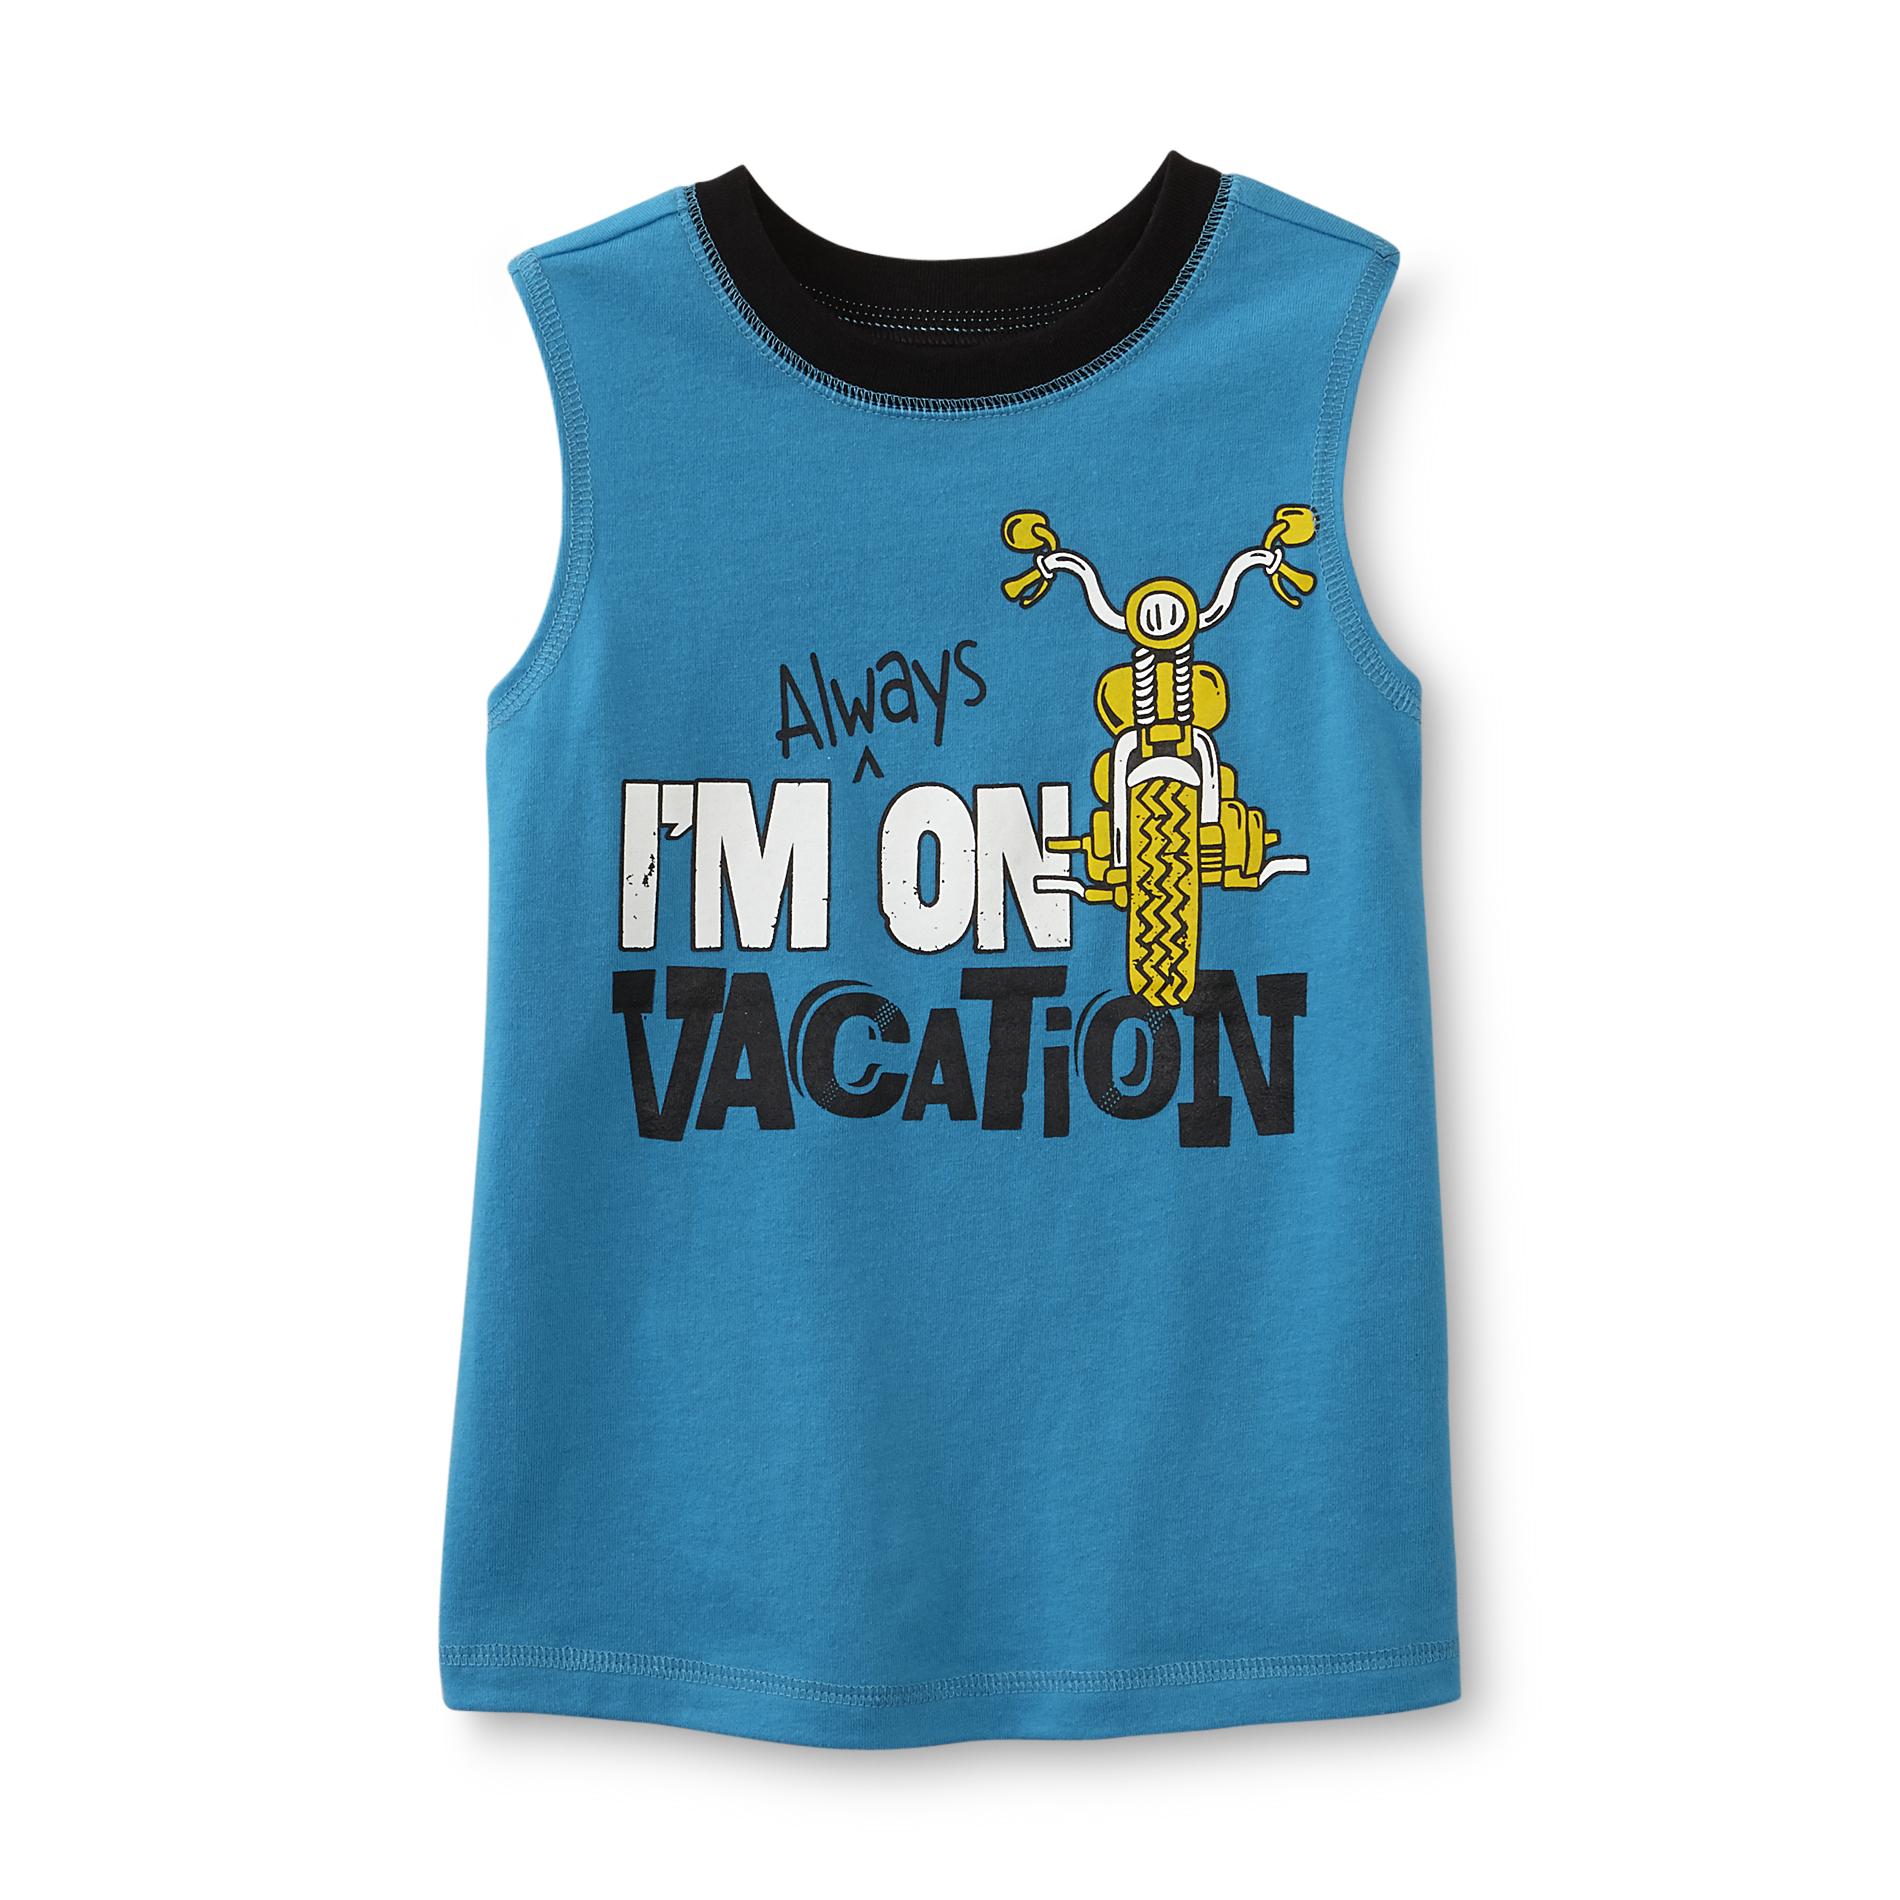 WonderKids Infant & Toddler Boy's Muscle Shirt - On Vacation